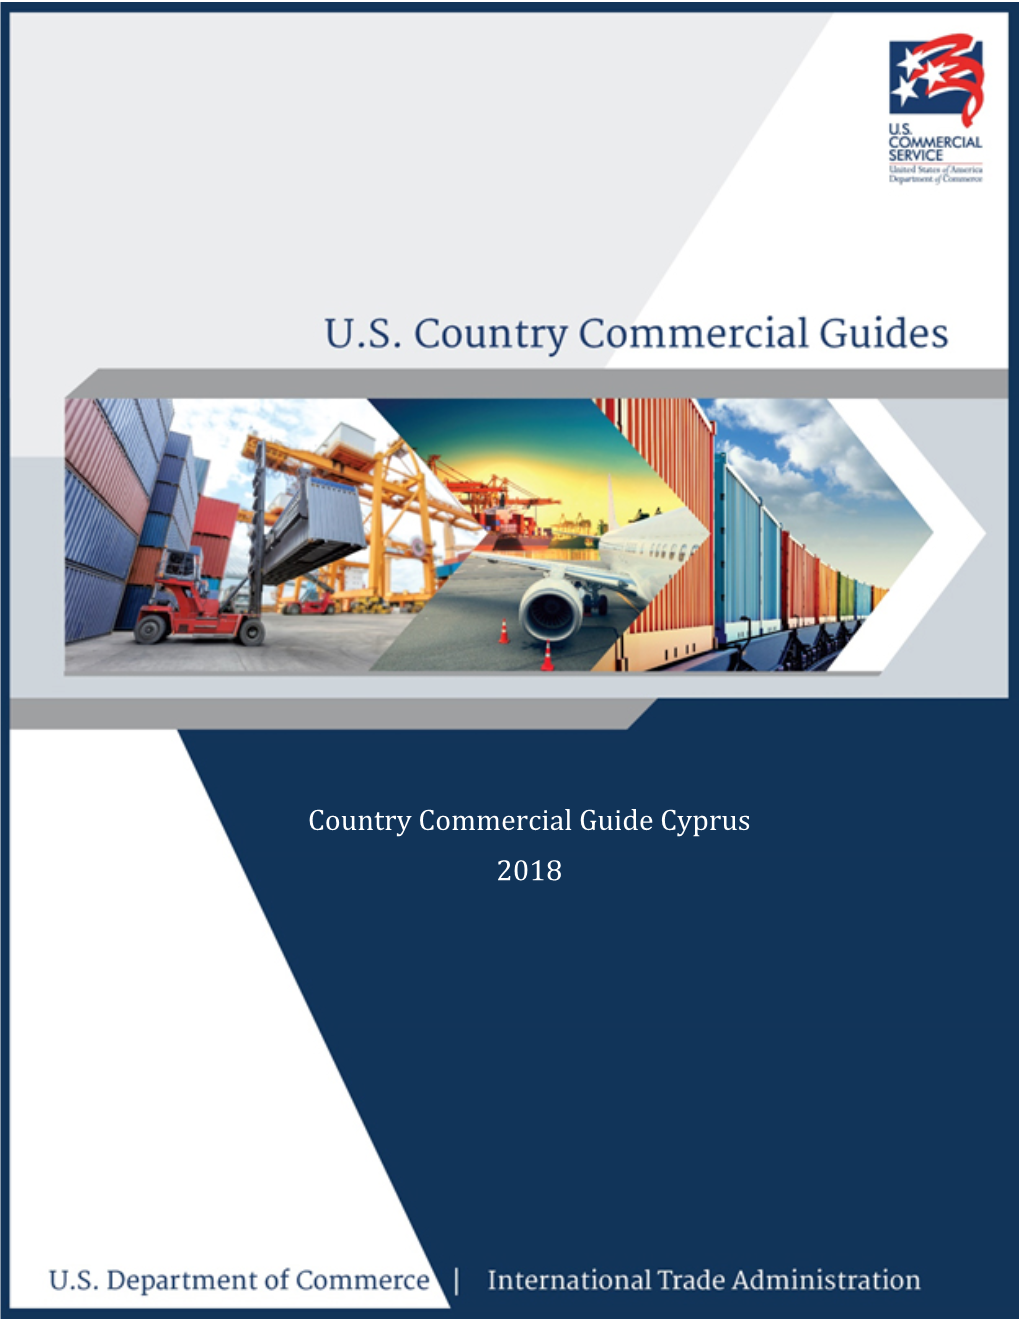 Country Commercial Guide Cyprus 2018